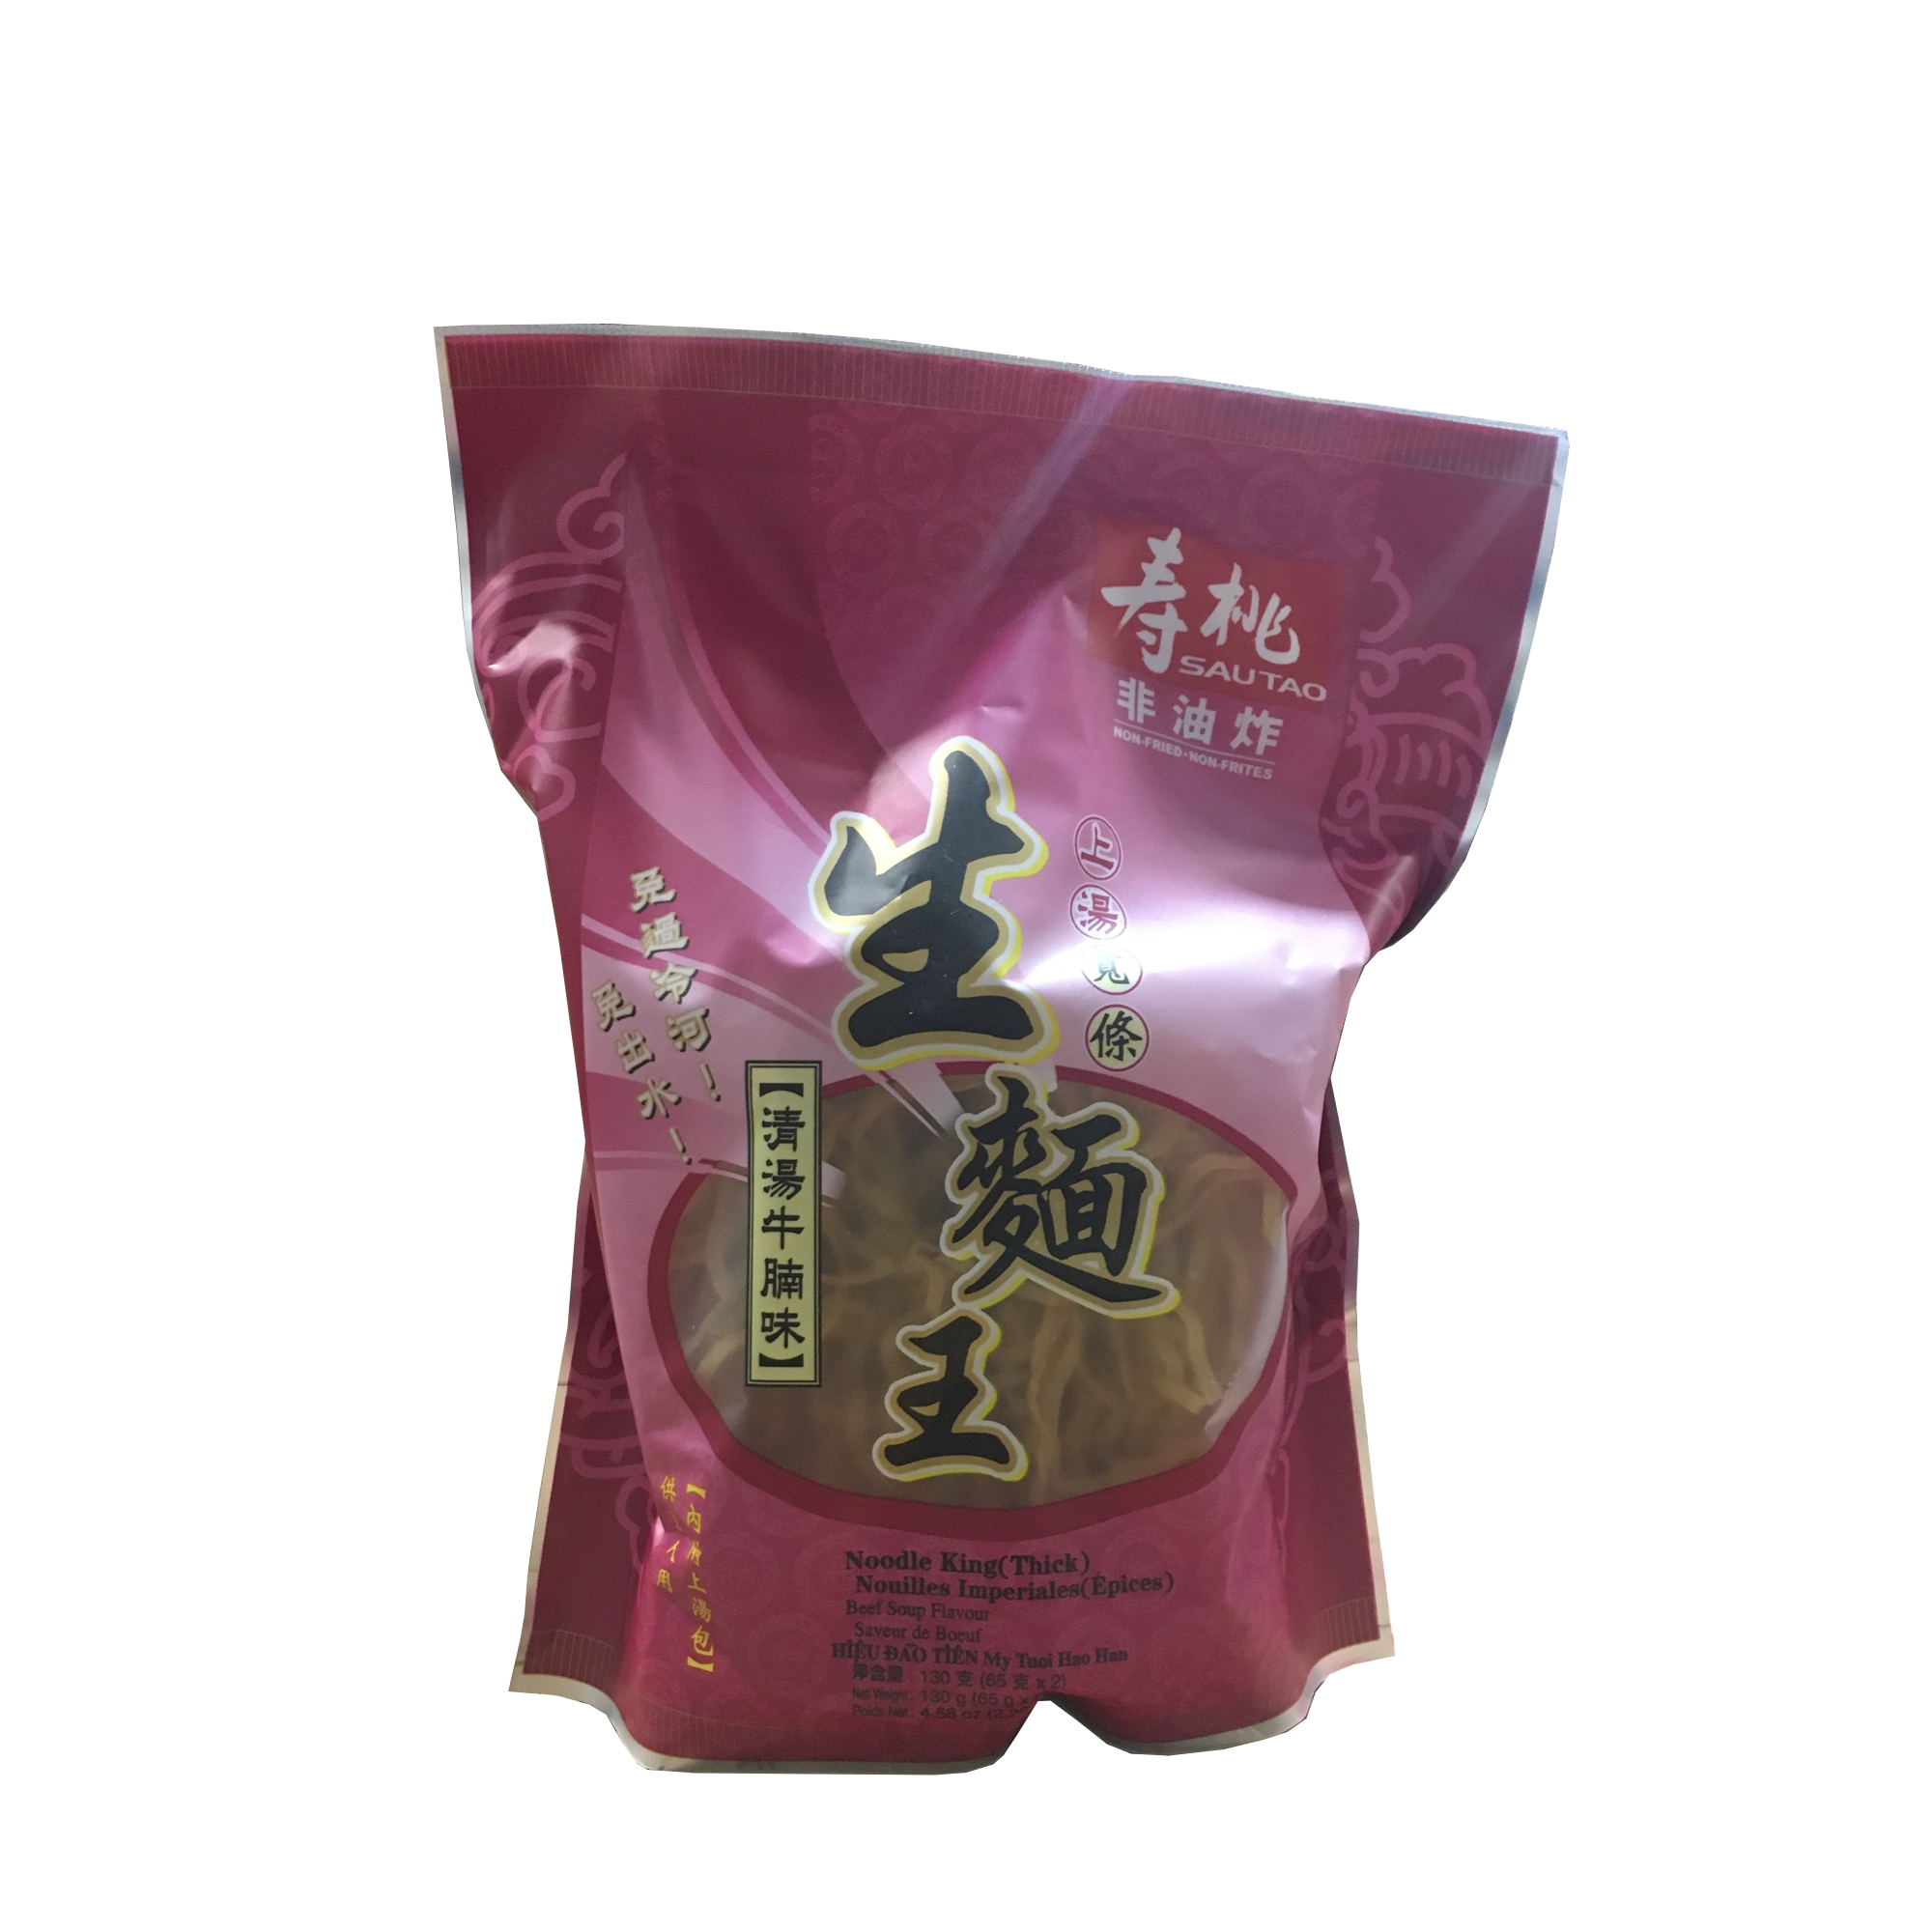 ST NOODLE KING (THICK) - BEEF FLAVOR ND137044